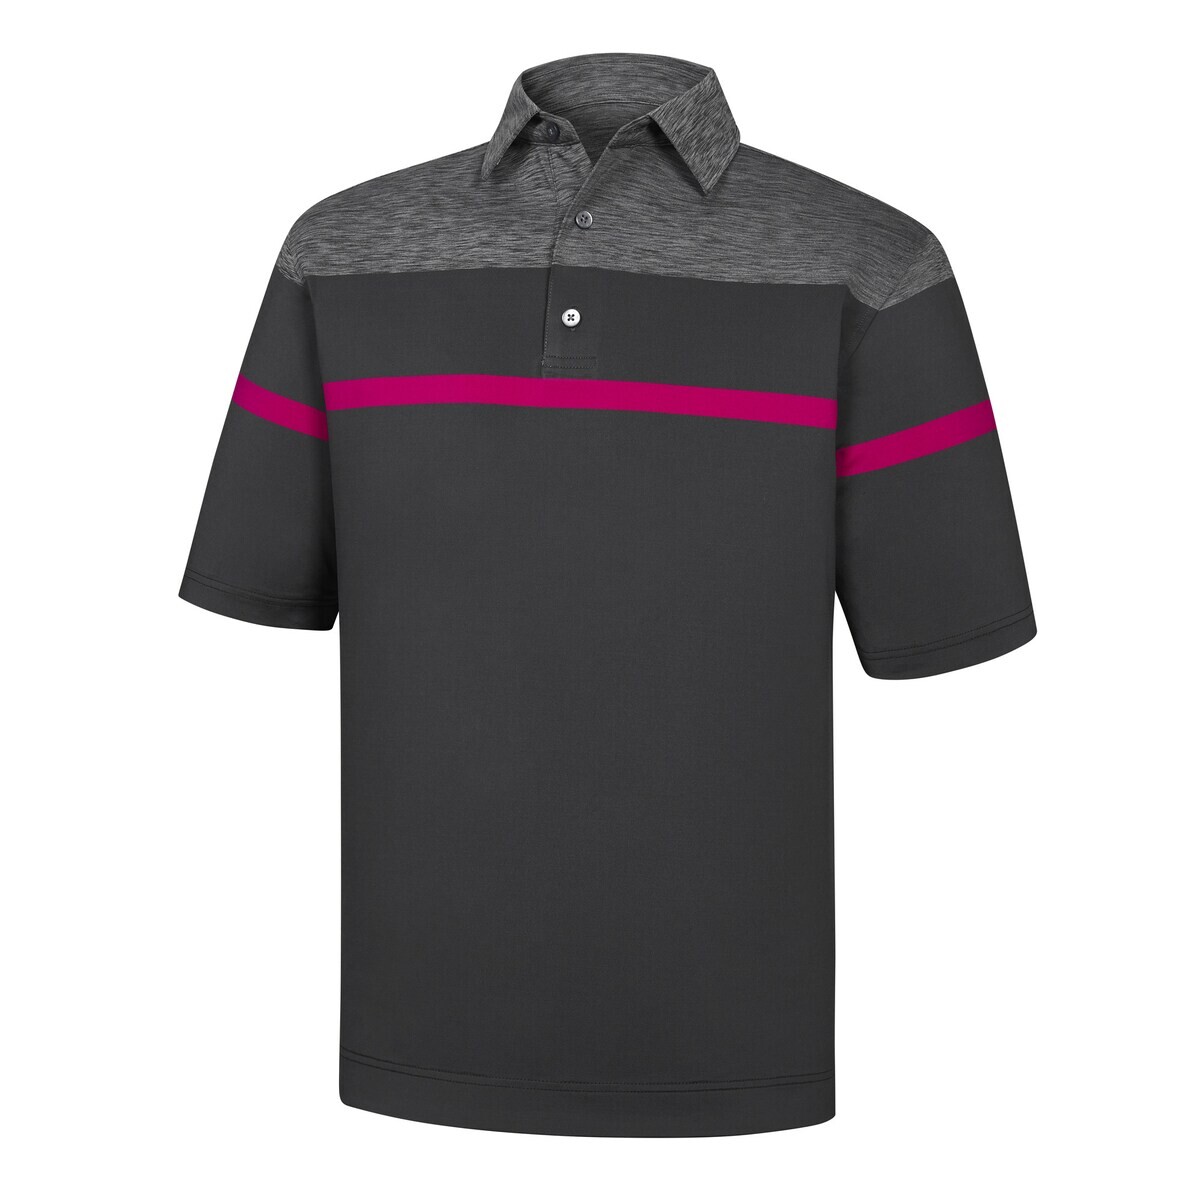 REMERA HOMBRE FOOTJOY PRODRY - Stretch Lisle Space Dyed Self - Gris - Rosa 